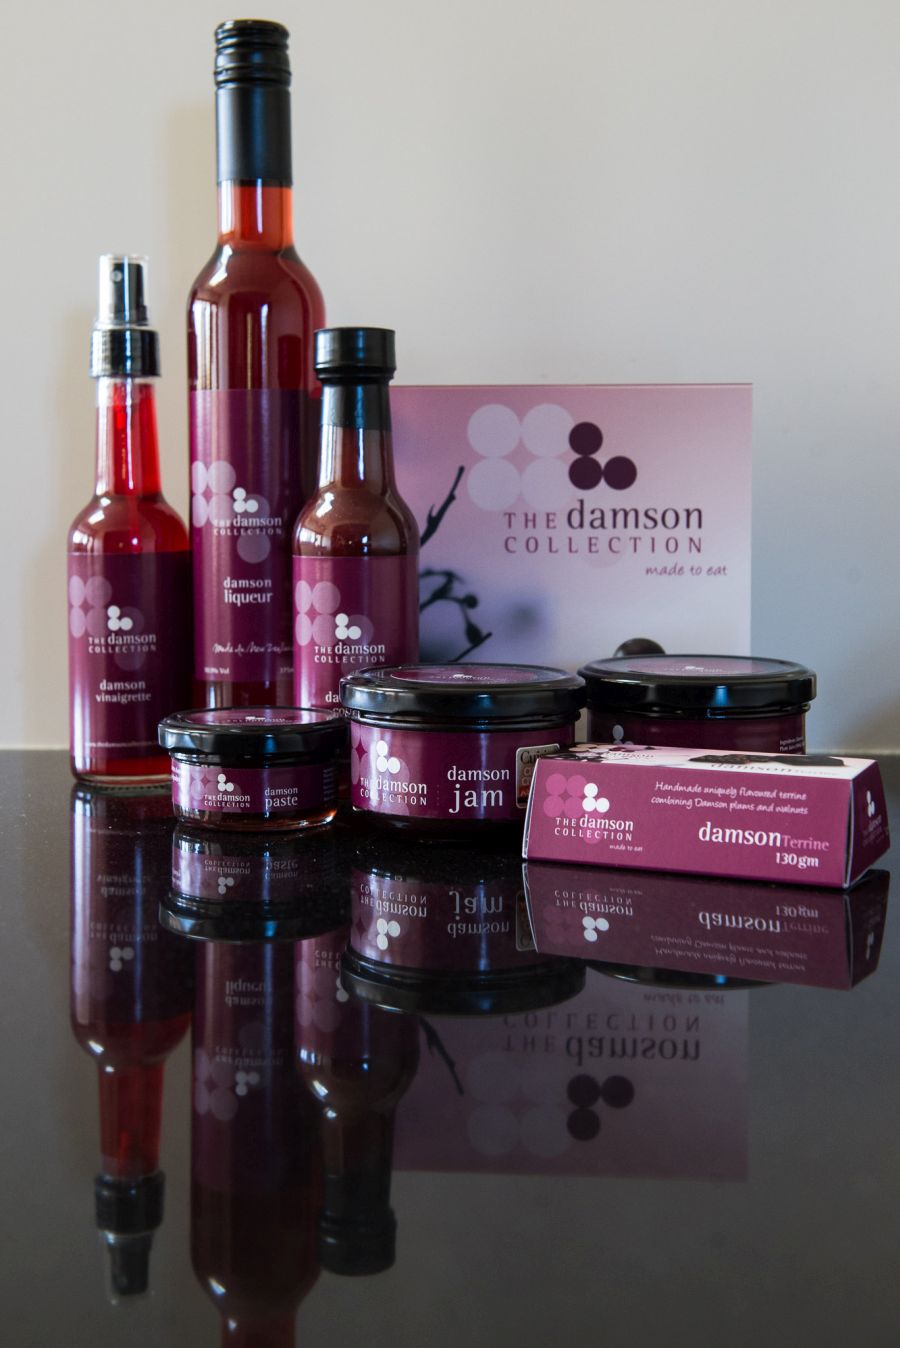 The Damson Collection